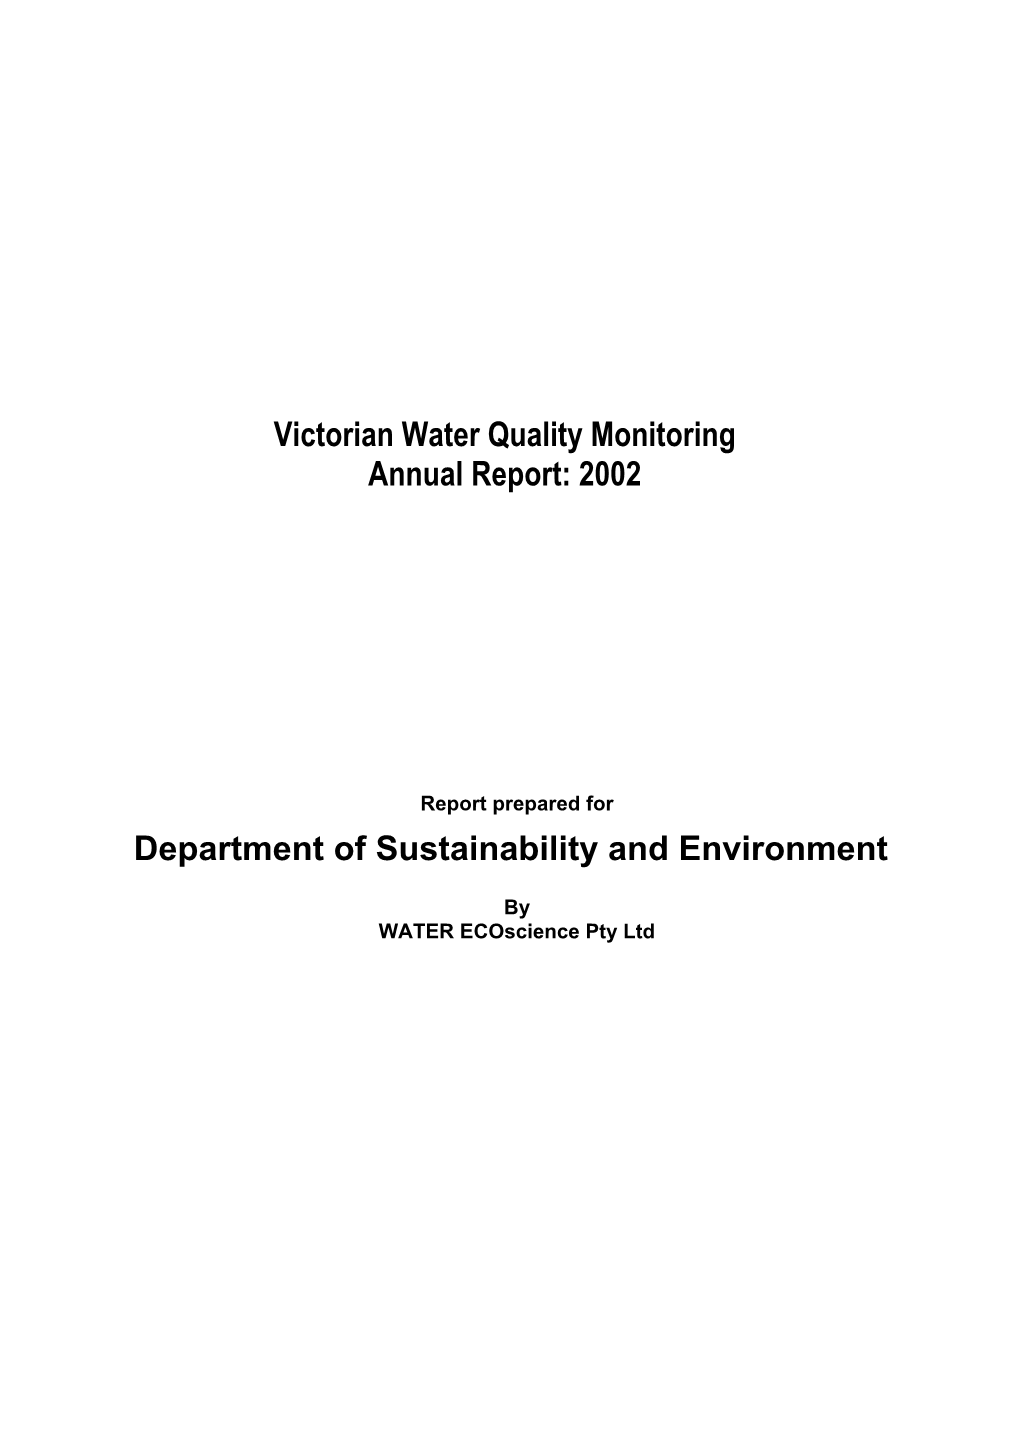 Victorian Water Quality Monitoring Annual Report: 2002